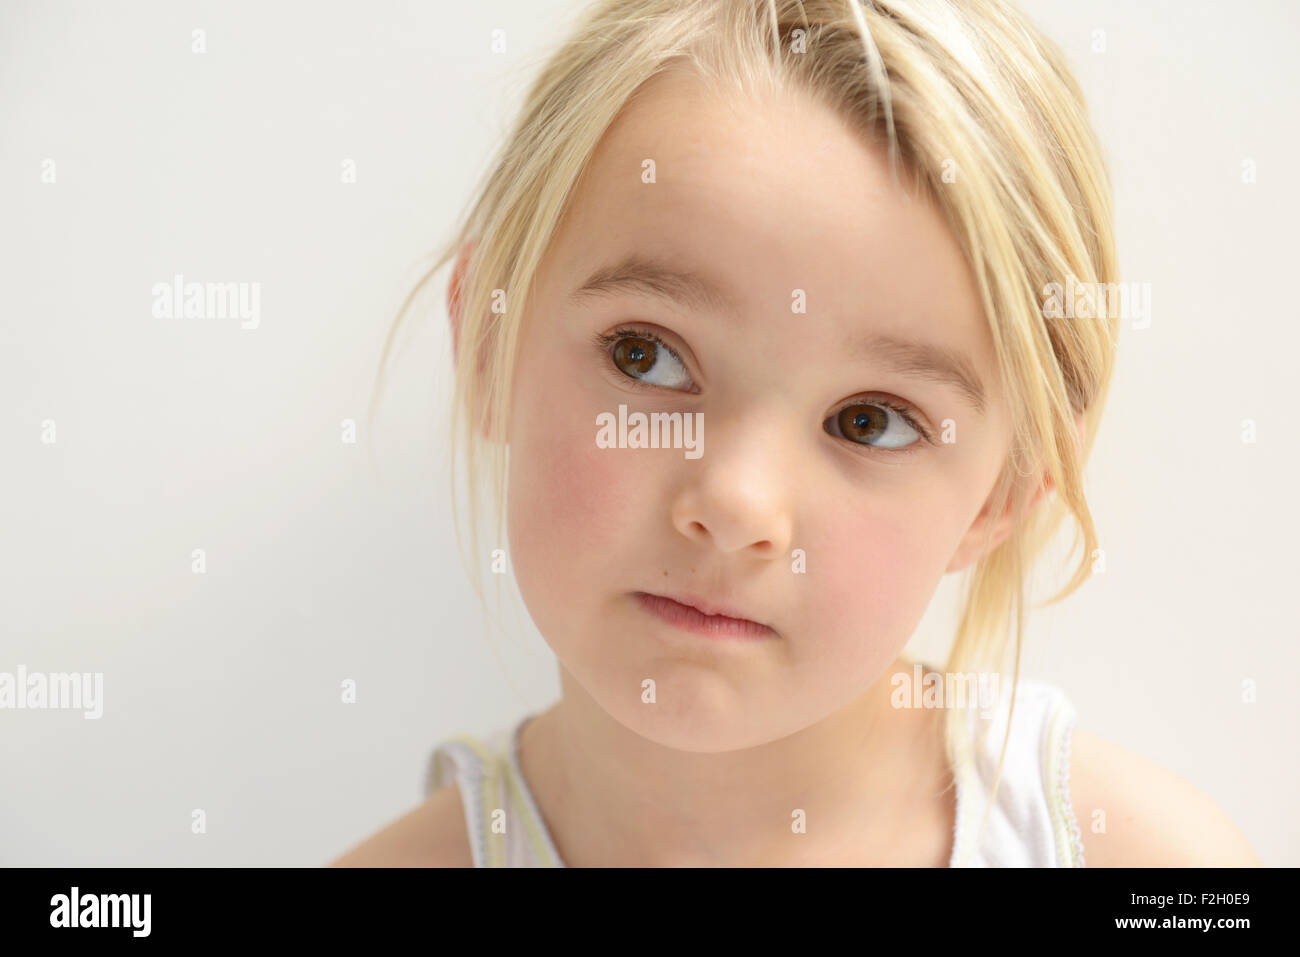 young girl looking at someone to the right Stock Photo